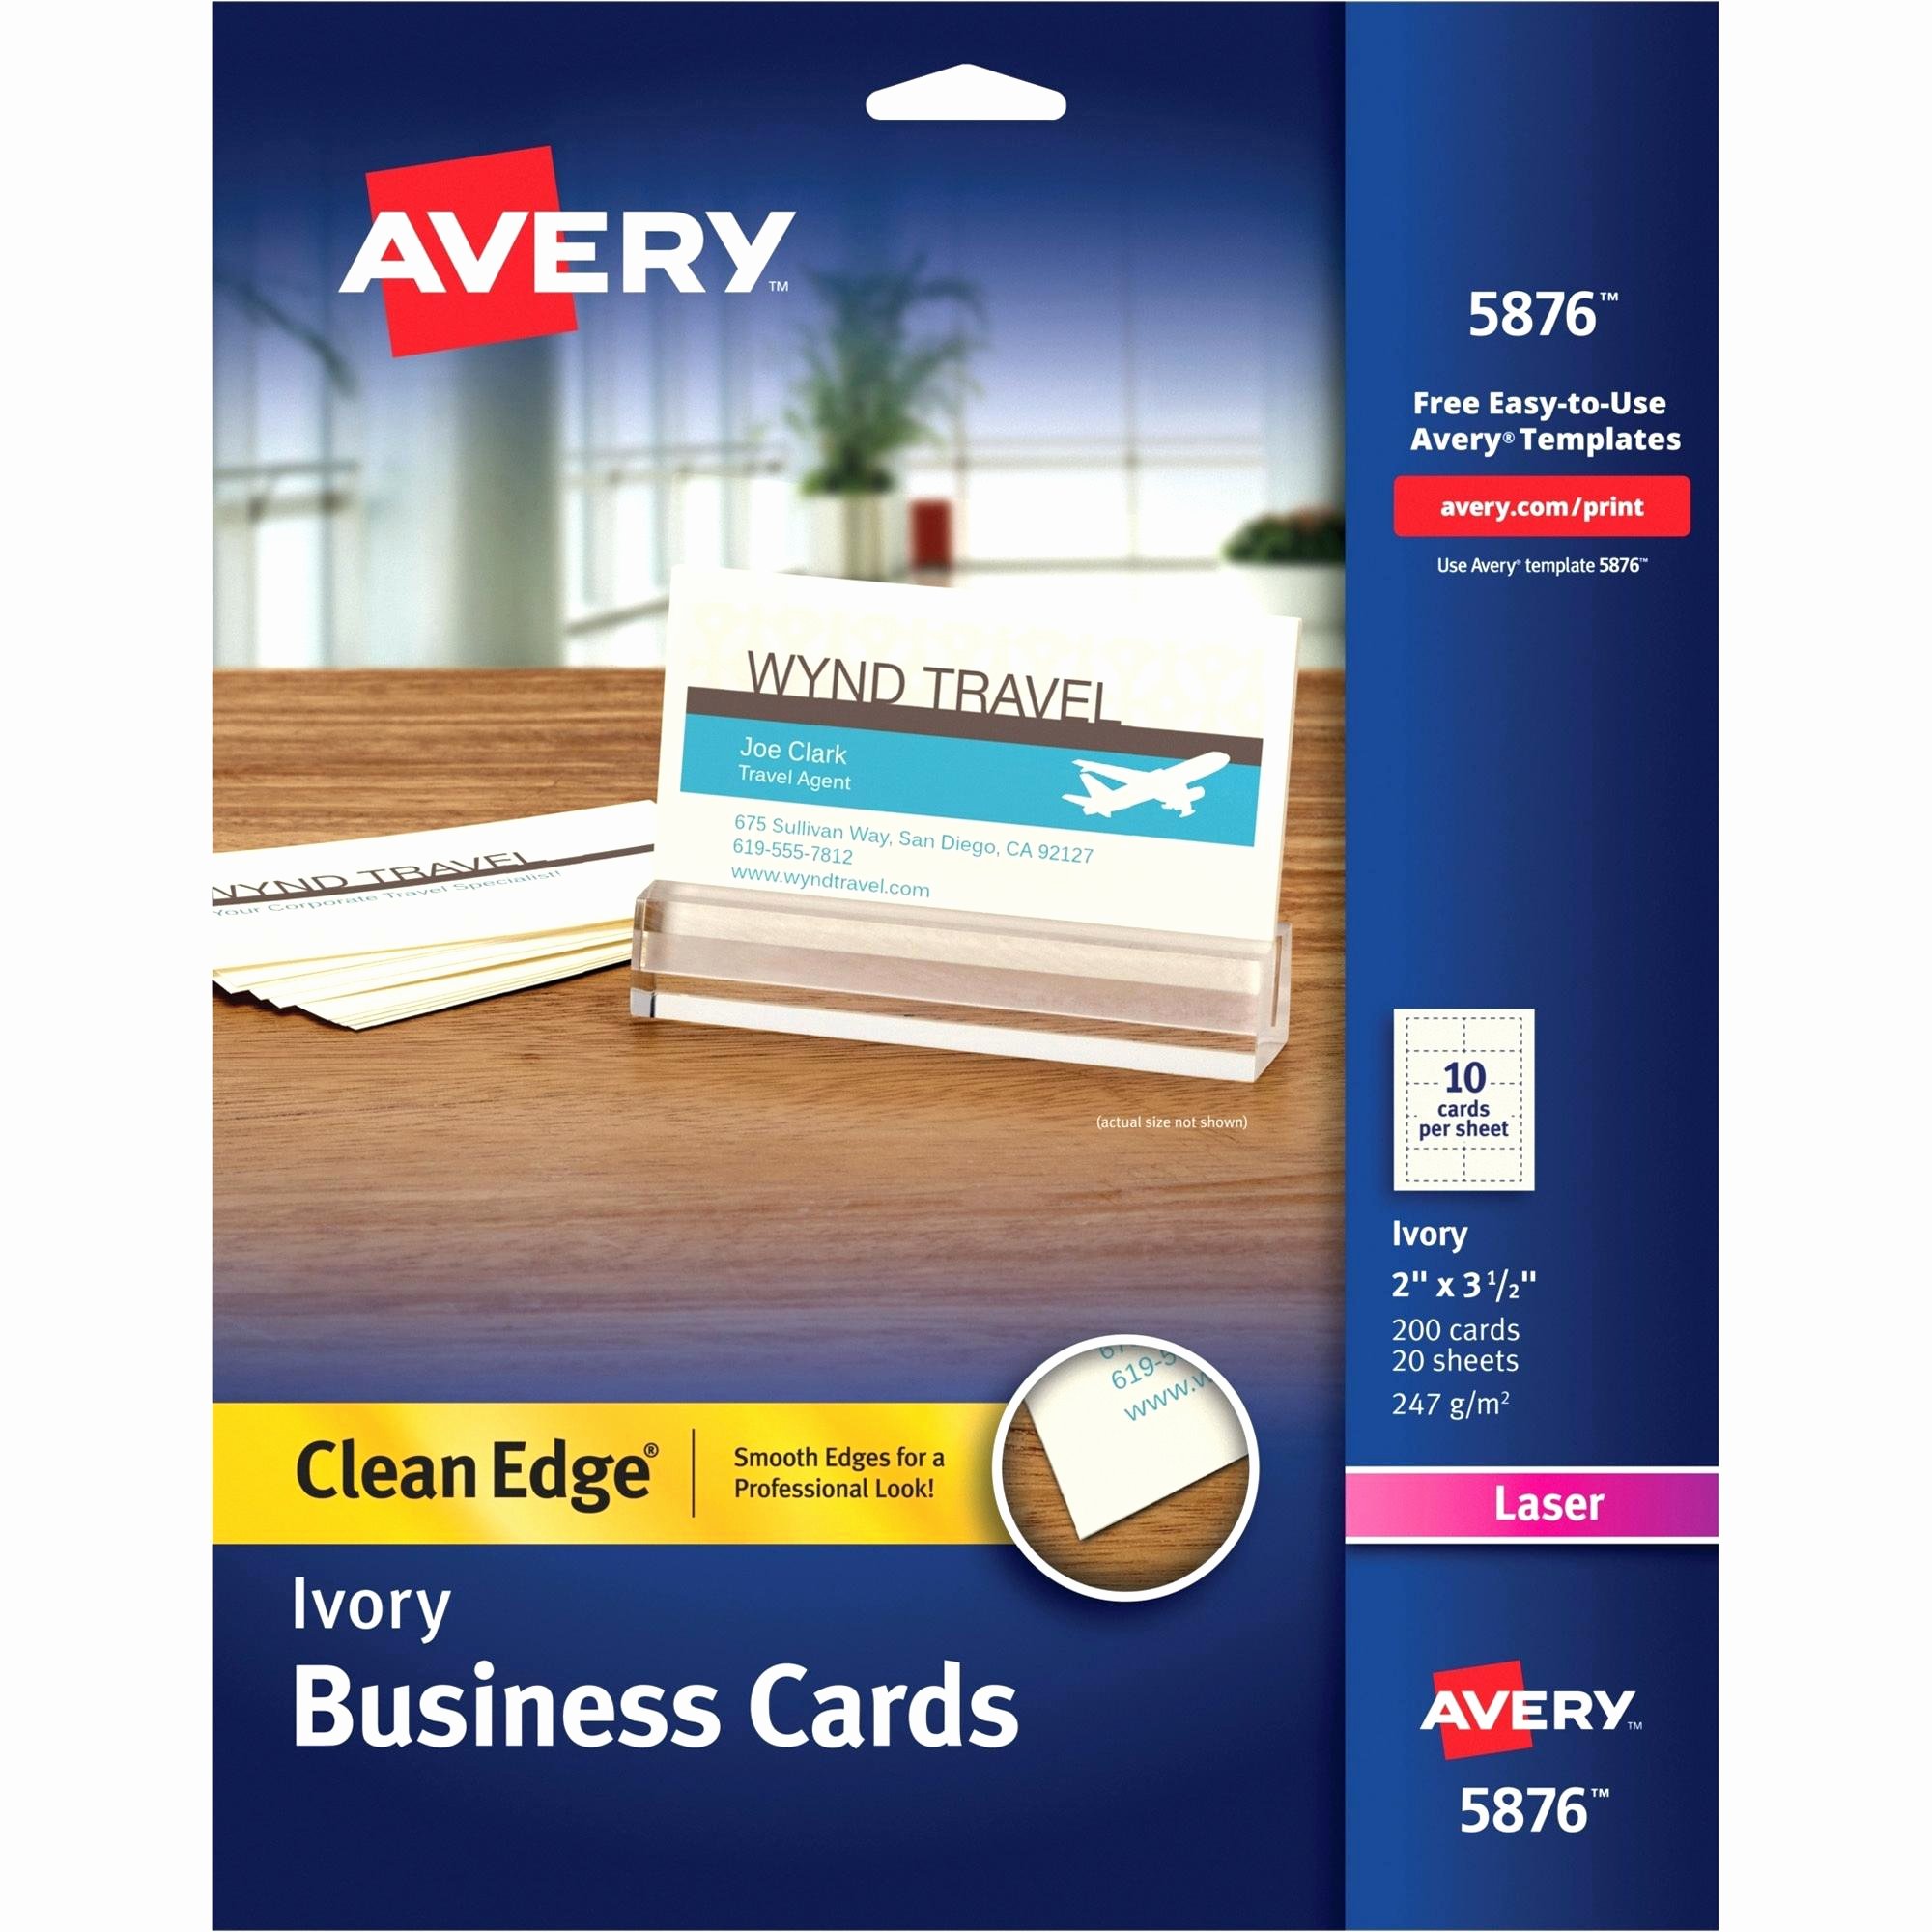 Avery Business Card Template 8376